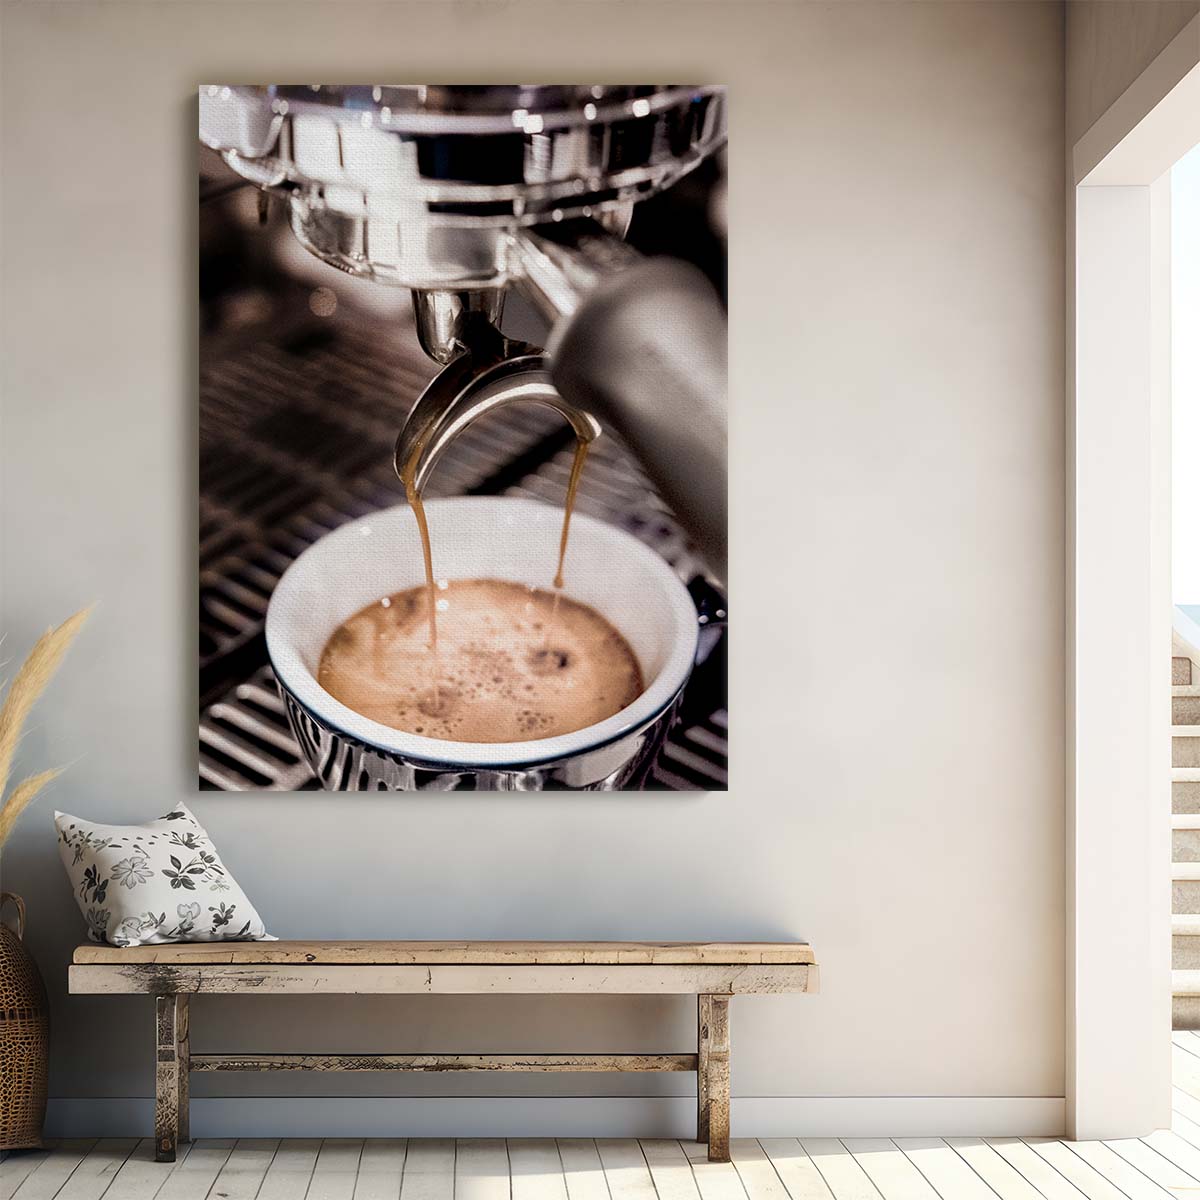 Barista's Espresso Drip Coffee Cup, Still-Life Photography Art by Luxuriance Designs, made in USA